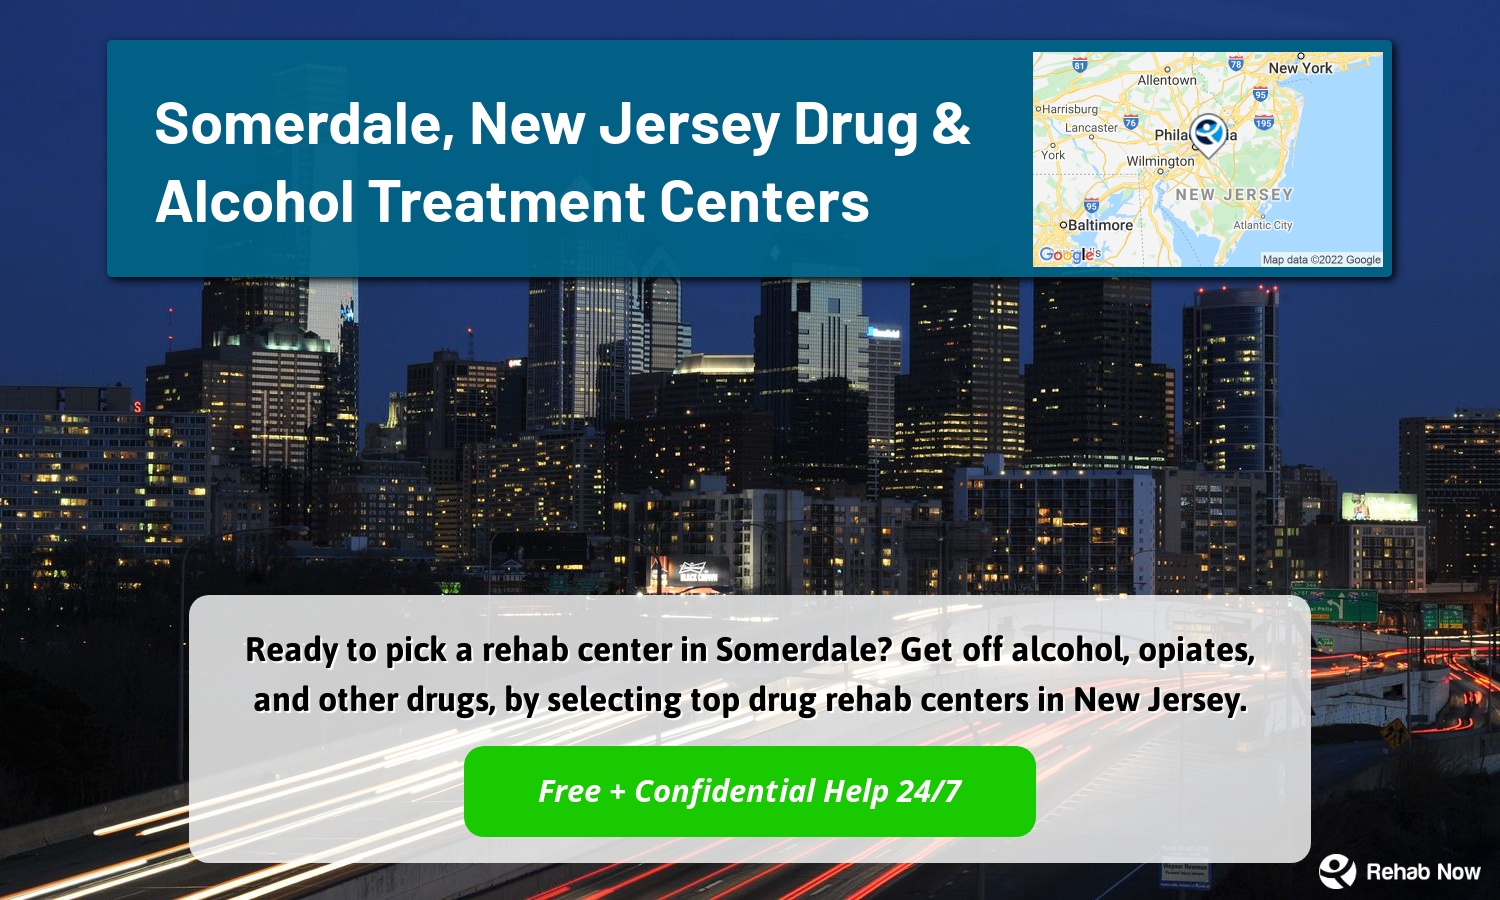 Ready to pick a rehab center in Somerdale? Get off alcohol, opiates, and other drugs, by selecting top drug rehab centers in New Jersey.